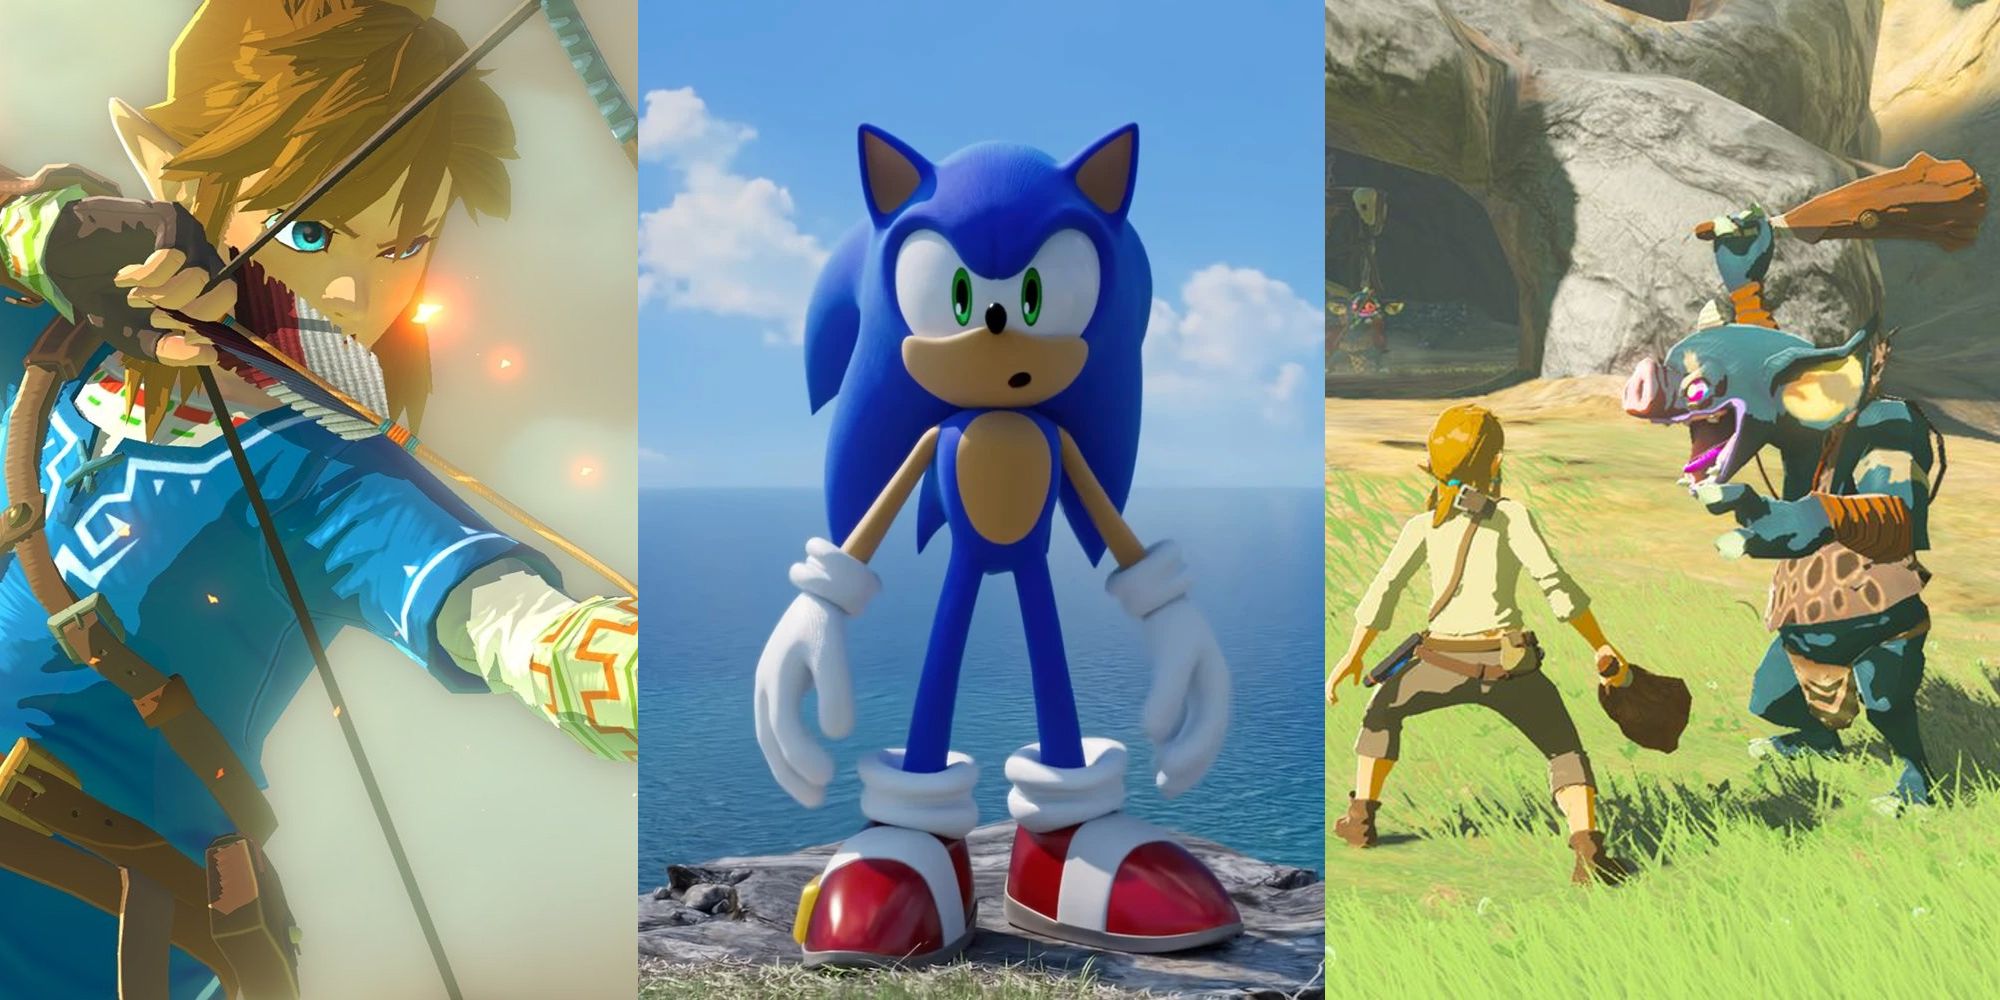 Link aiming his bow in a trailer for BOTW; Sonic looking surprised in a Sonic Frontiers trailer; Link battling a Moblin in BOTW